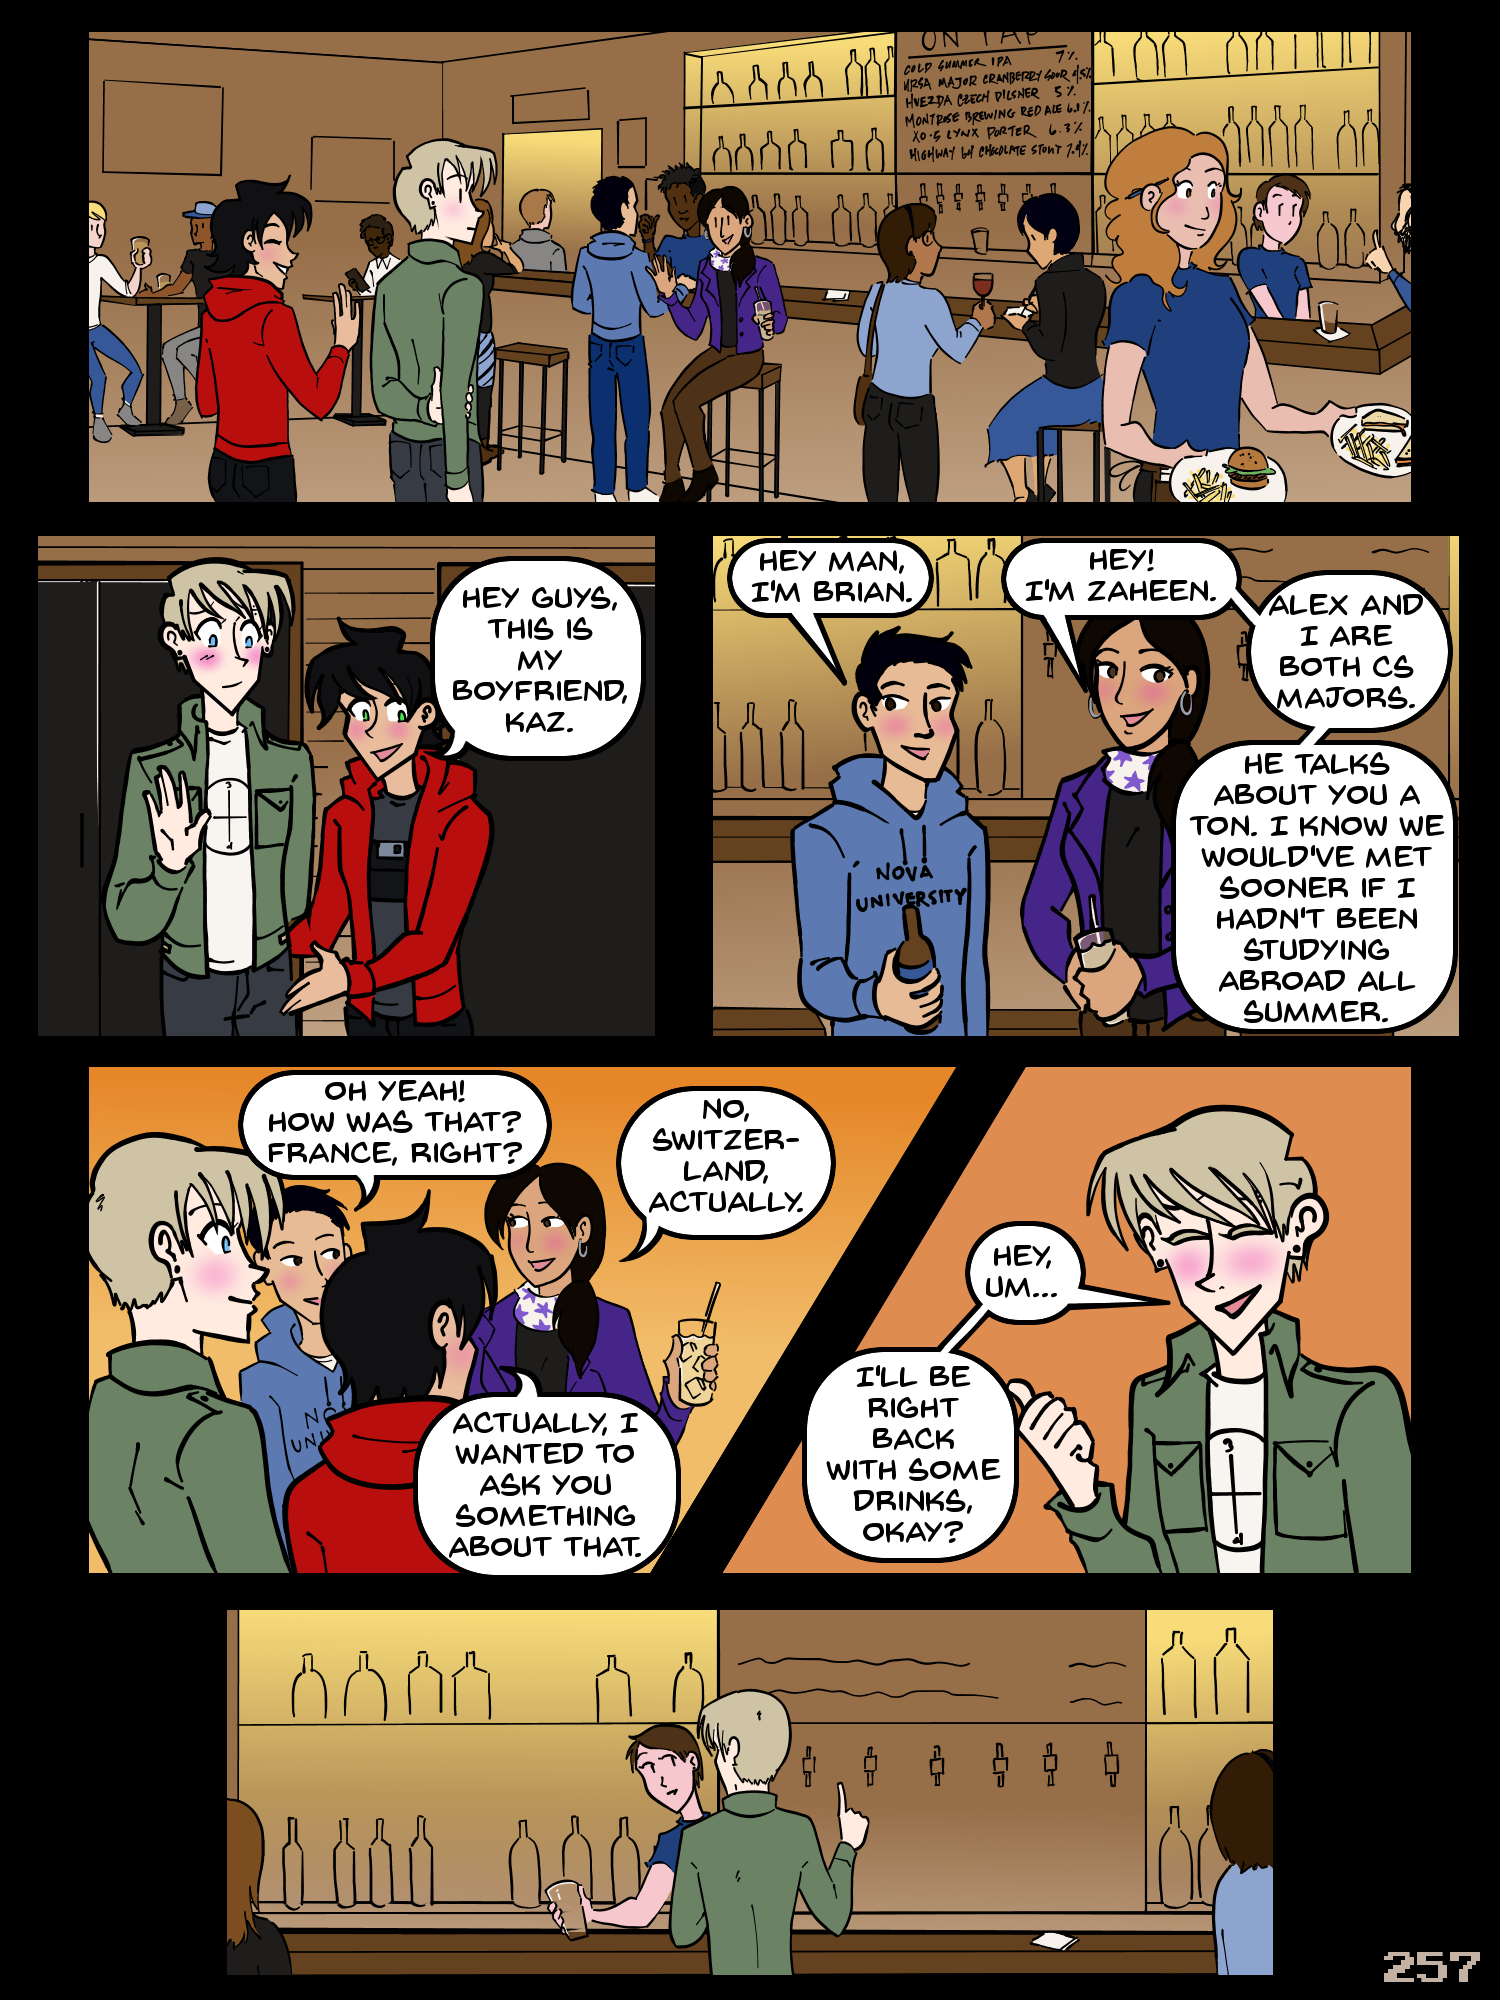 Chapter 9 – Page 257